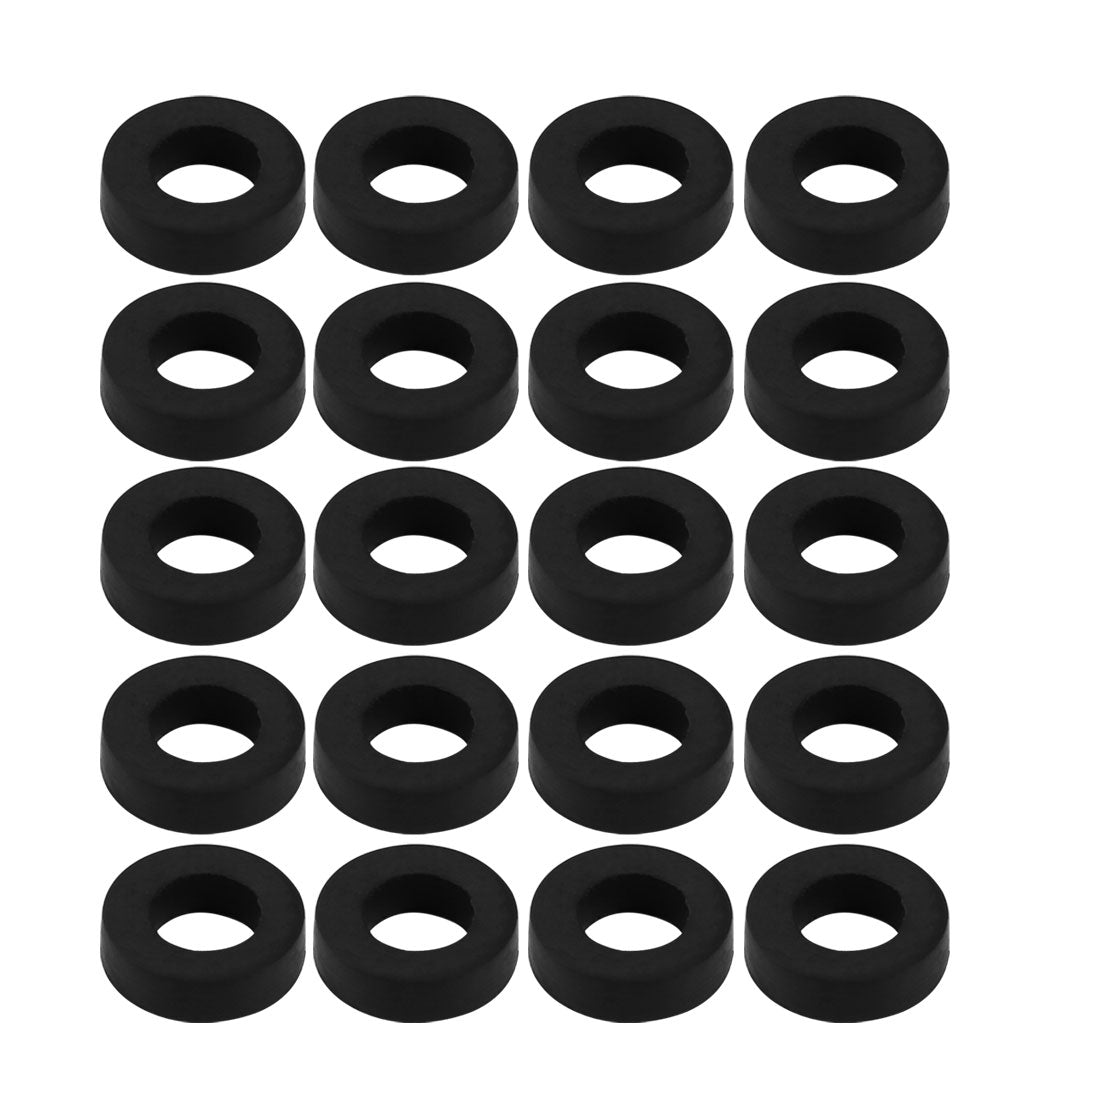 Uxcell Uxcell 20pcs Black Rubber Round Flat Washer Assortment Size 14x24x3mm Flat Washer